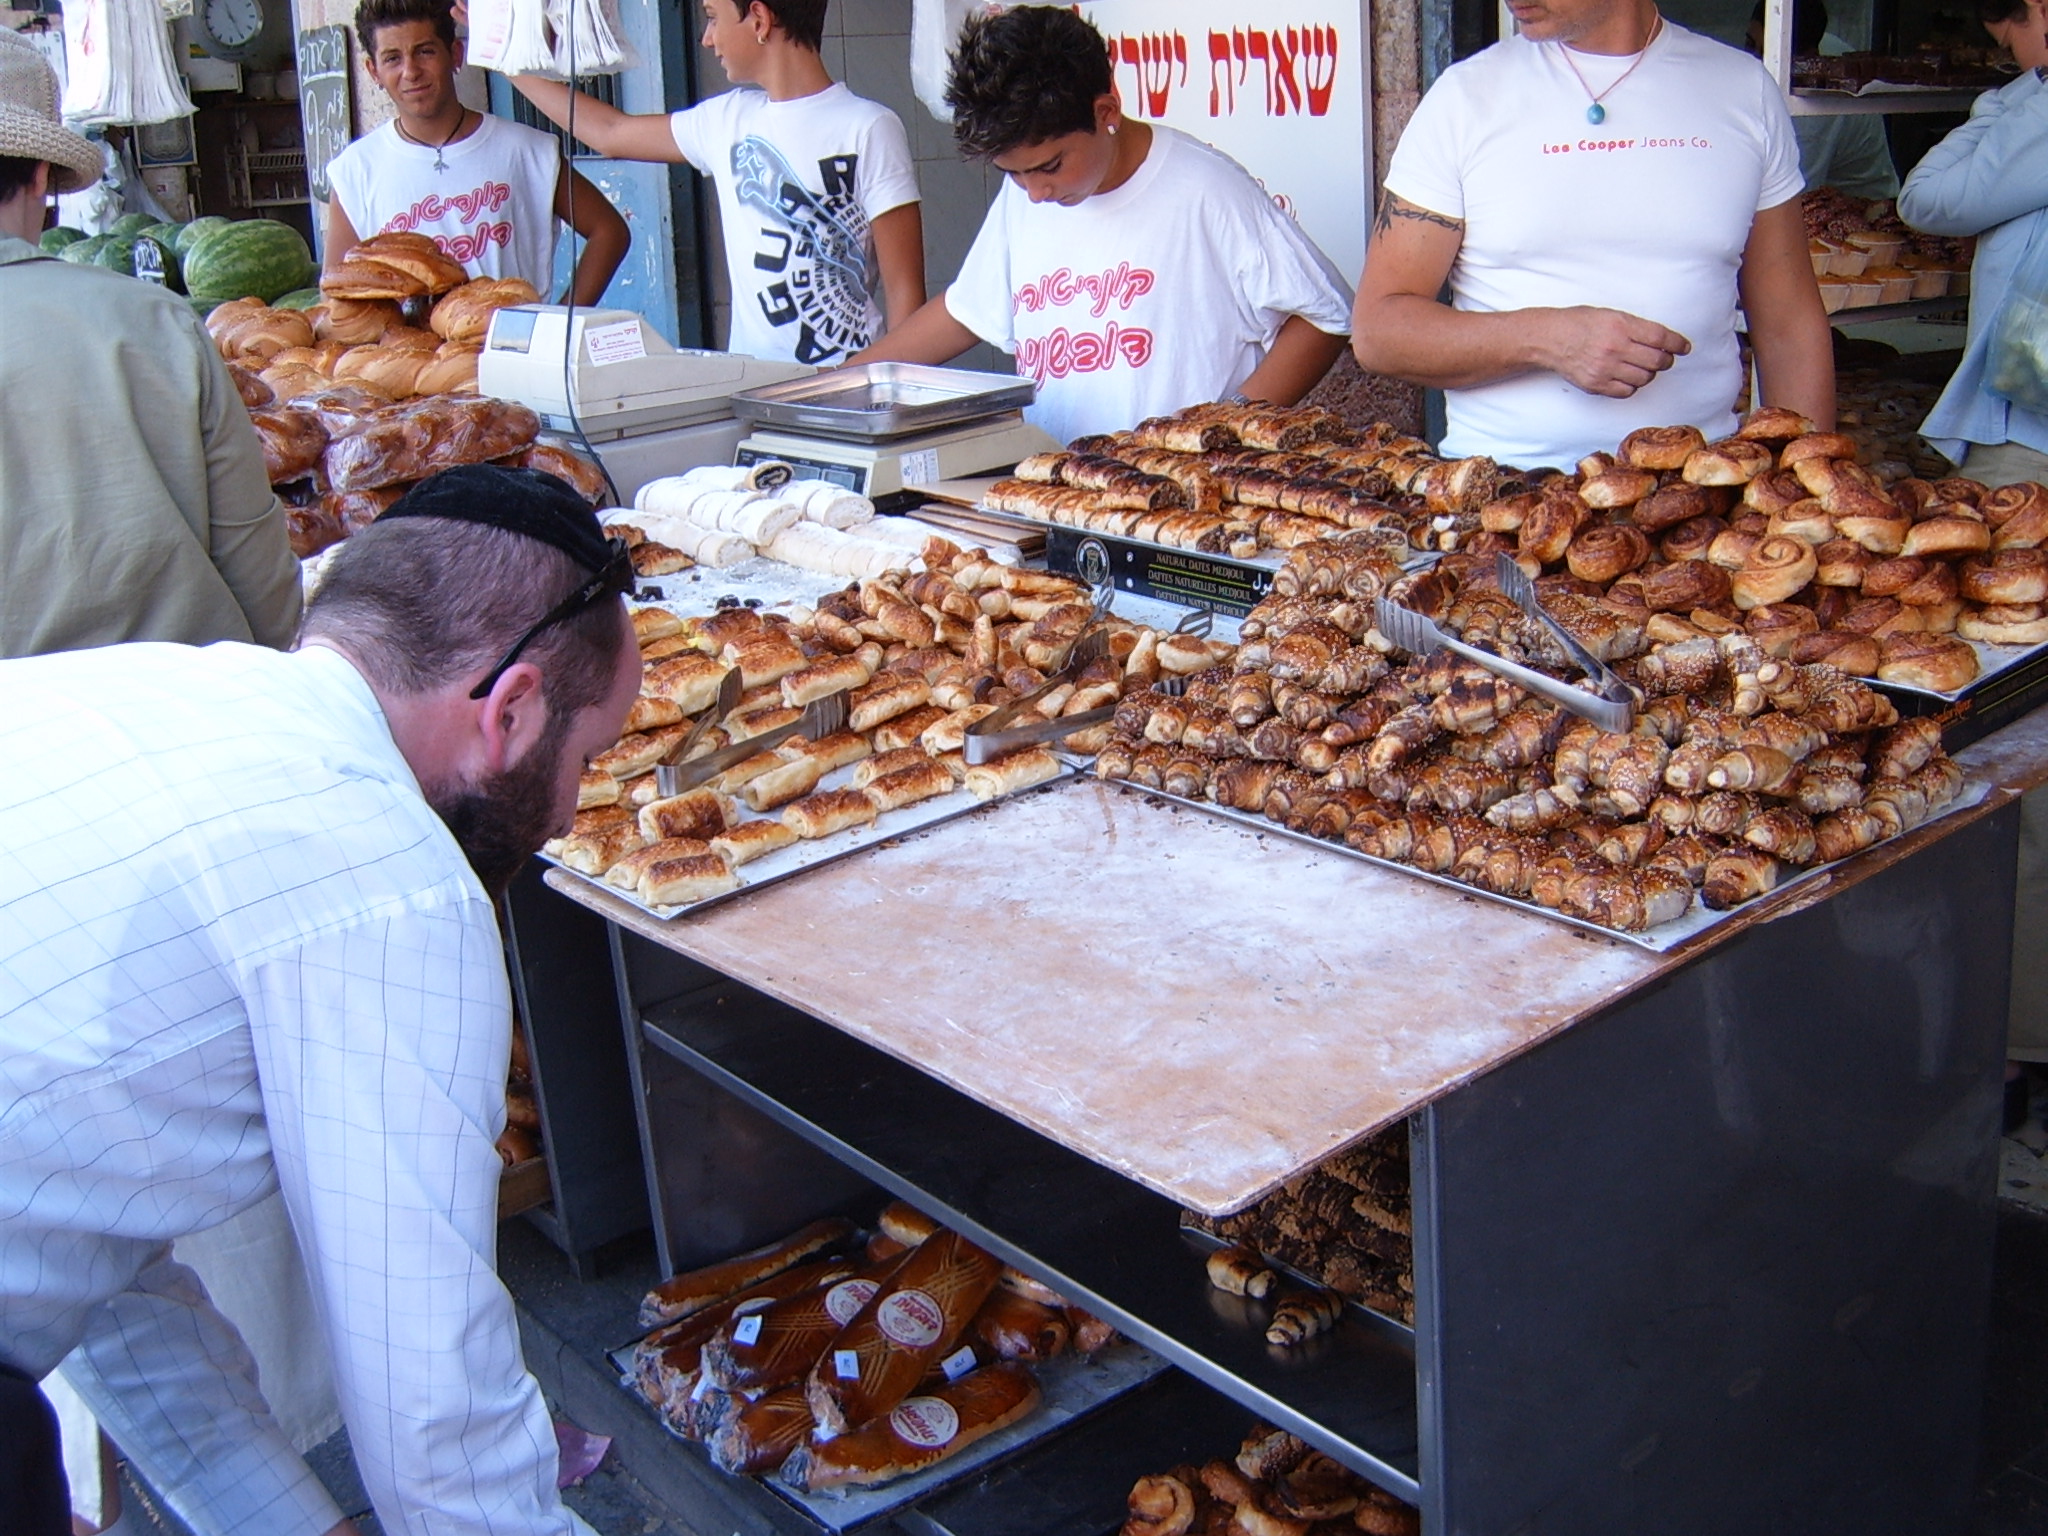 people browse the selection of baked goods for sale at a market